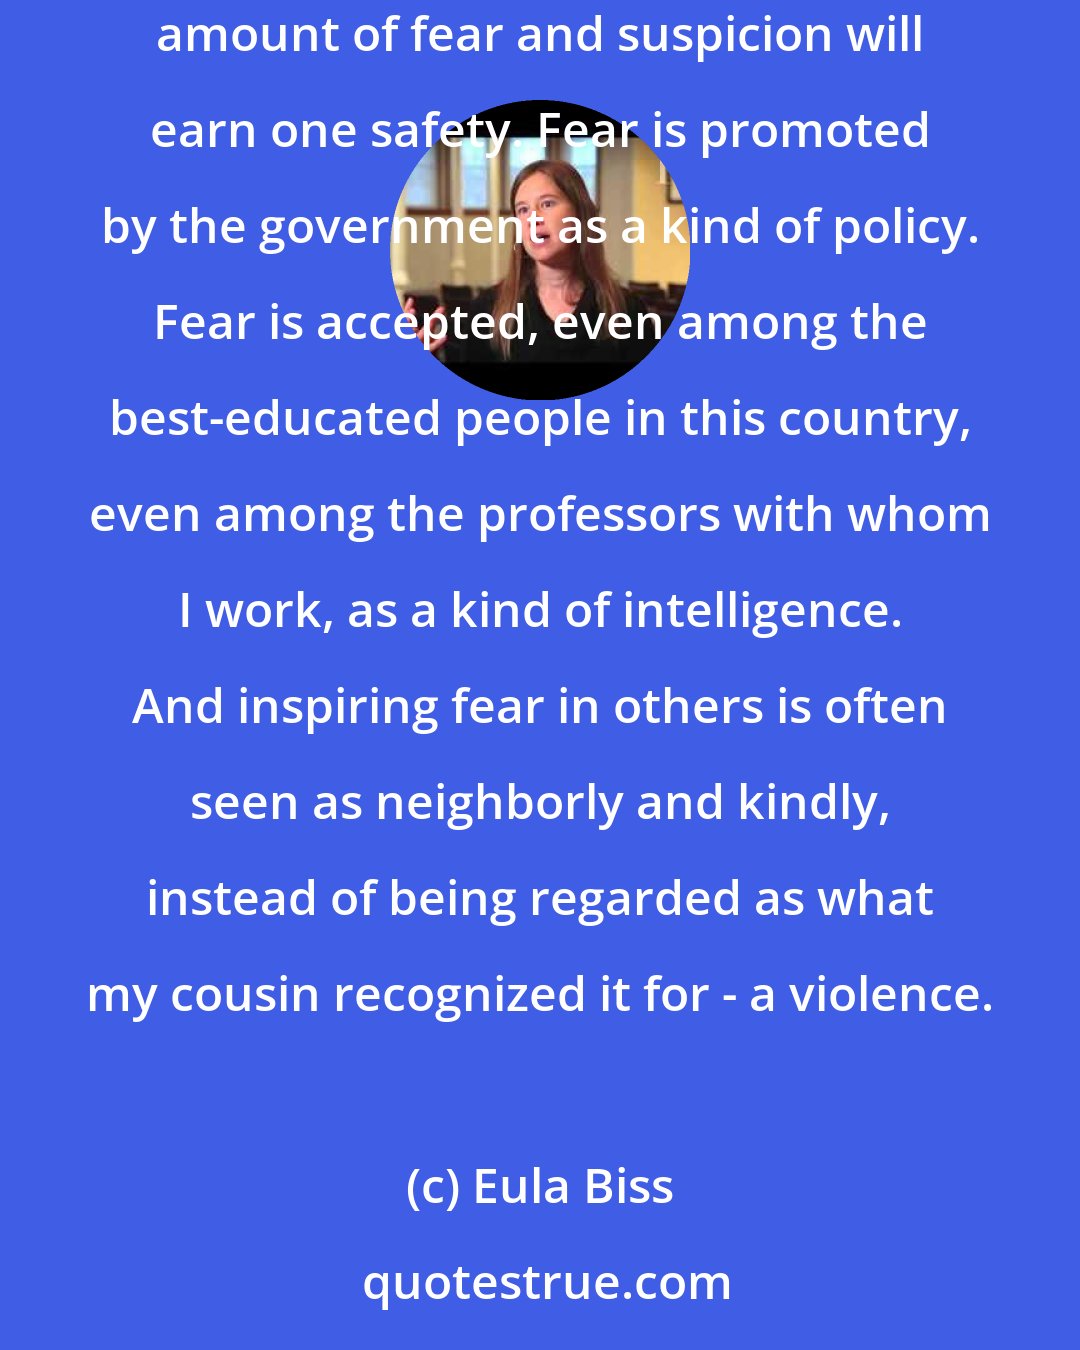 Eula Biss: One of the paradoxes of our time is that the War on Terror has served mainly to reinforce a collective belief that maintaining the right amount of fear and suspicion will earn one safety. Fear is promoted by the government as a kind of policy. Fear is accepted, even among the best-educated people in this country, even among the professors with whom I work, as a kind of intelligence. And inspiring fear in others is often seen as neighborly and kindly, instead of being regarded as what my cousin recognized it for - a violence.